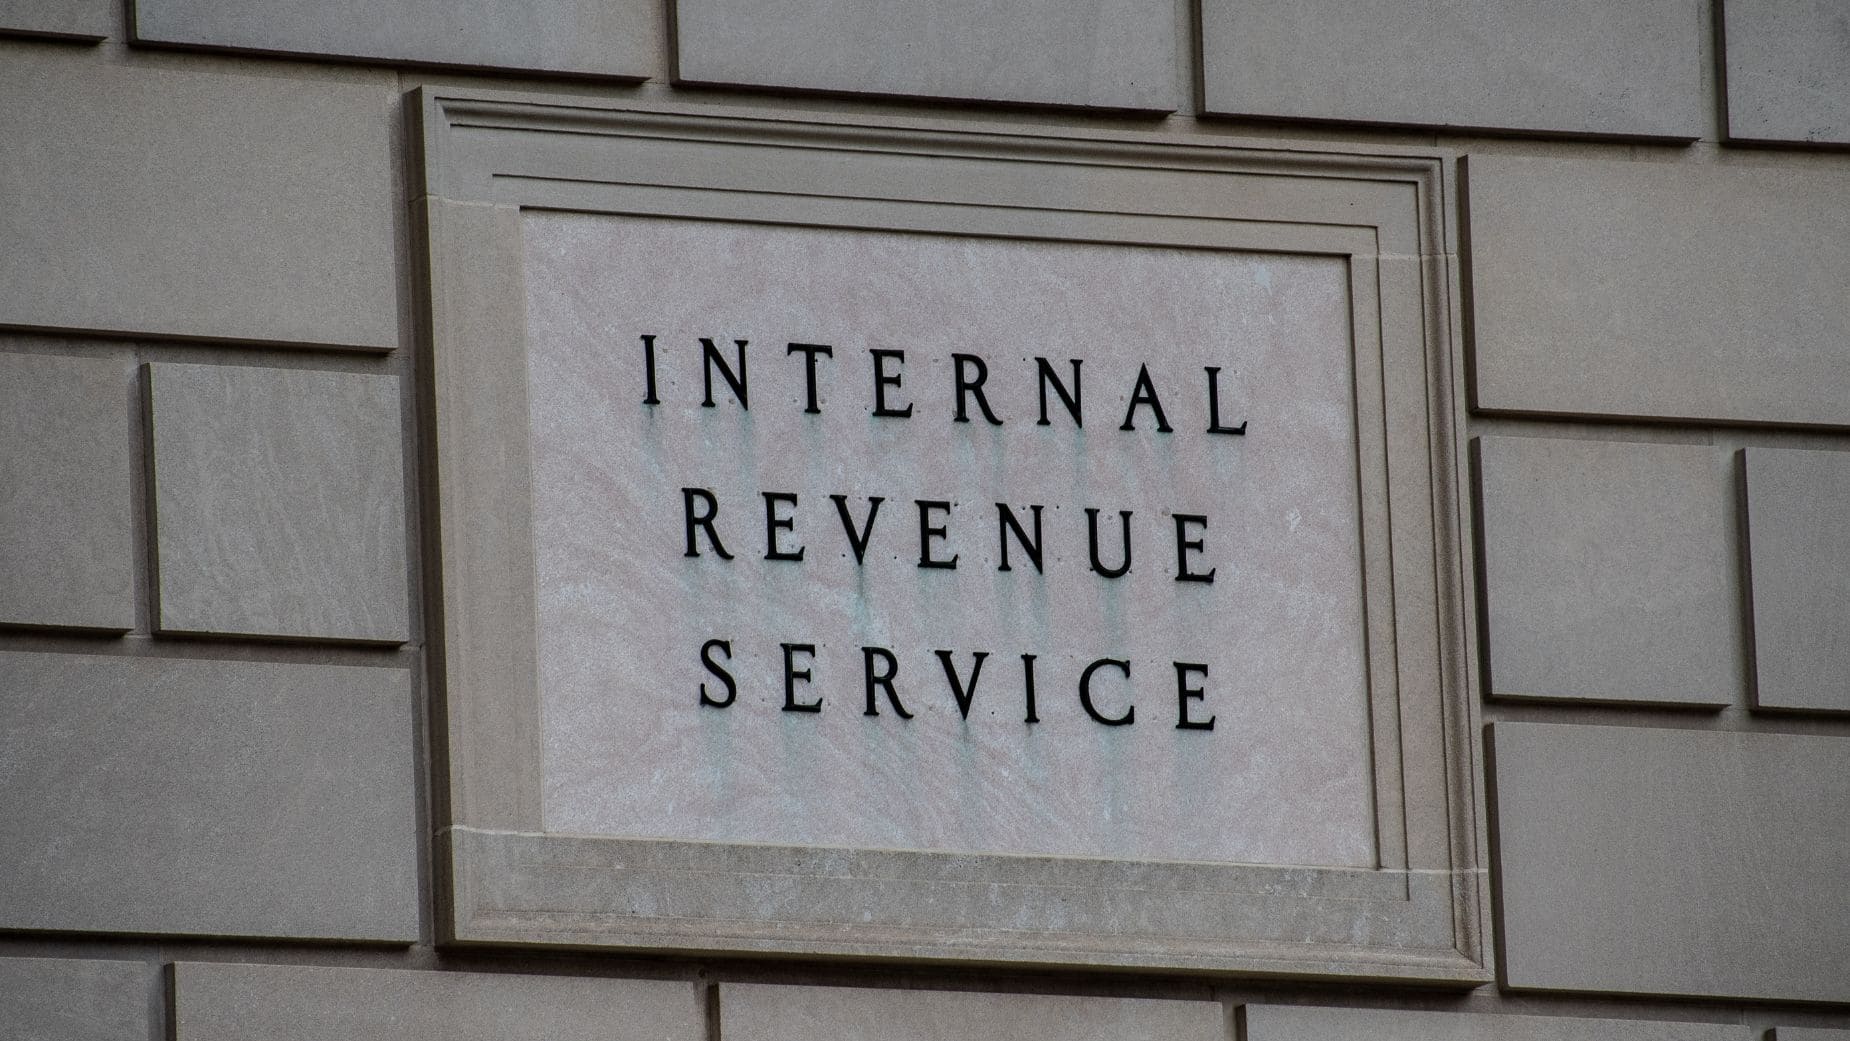 The IRS offers extra time to send the EITC